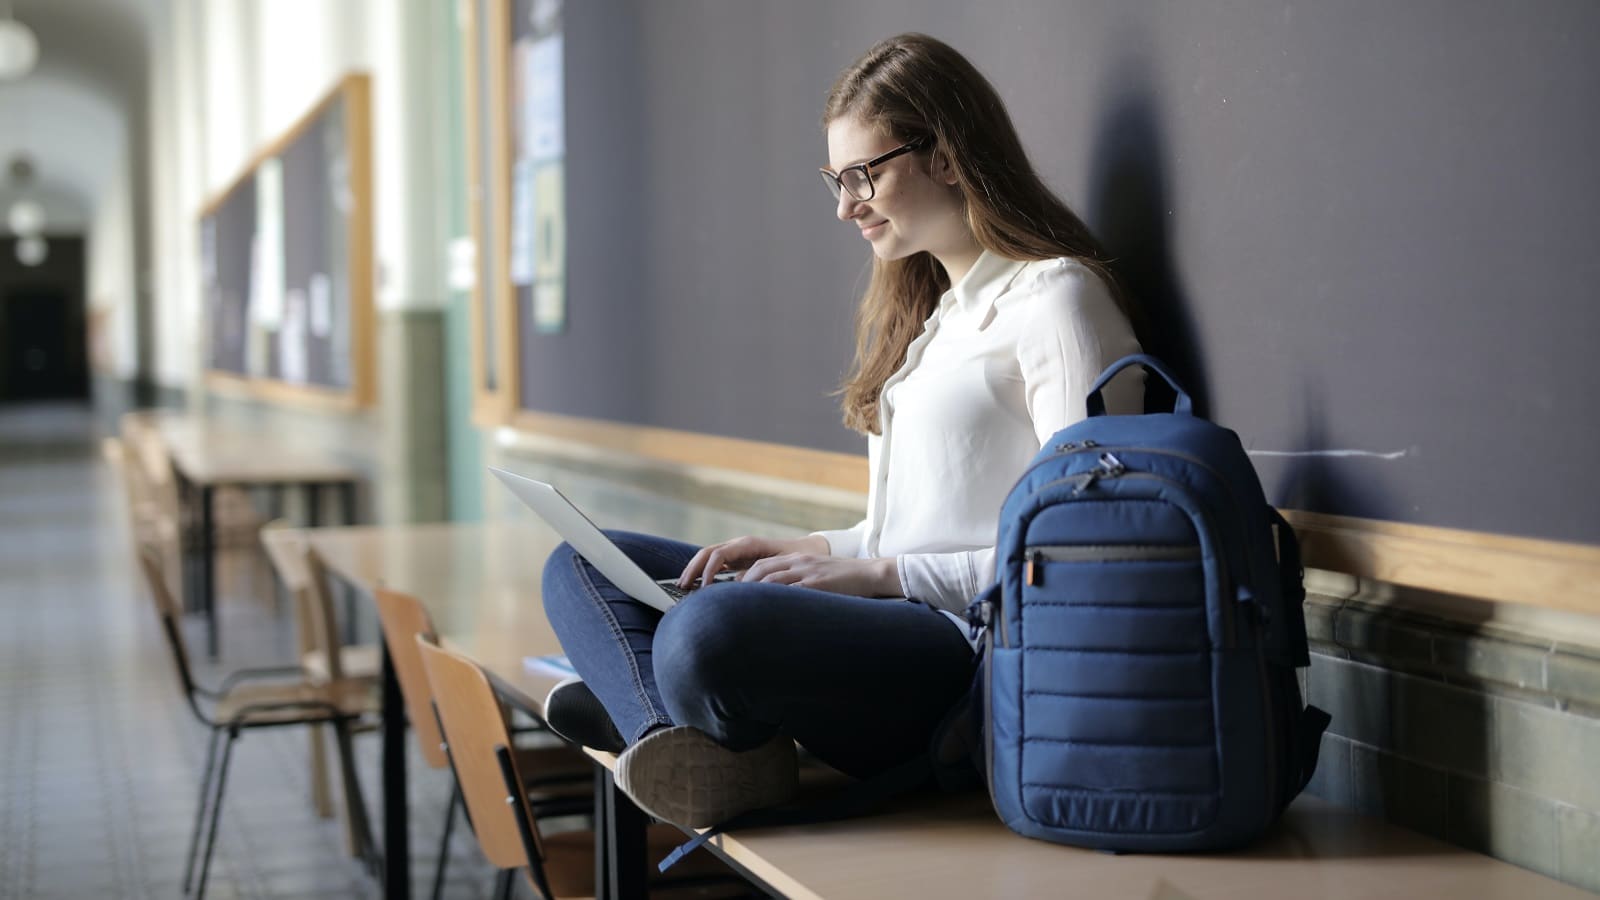 Girl on laptop with blue backpack